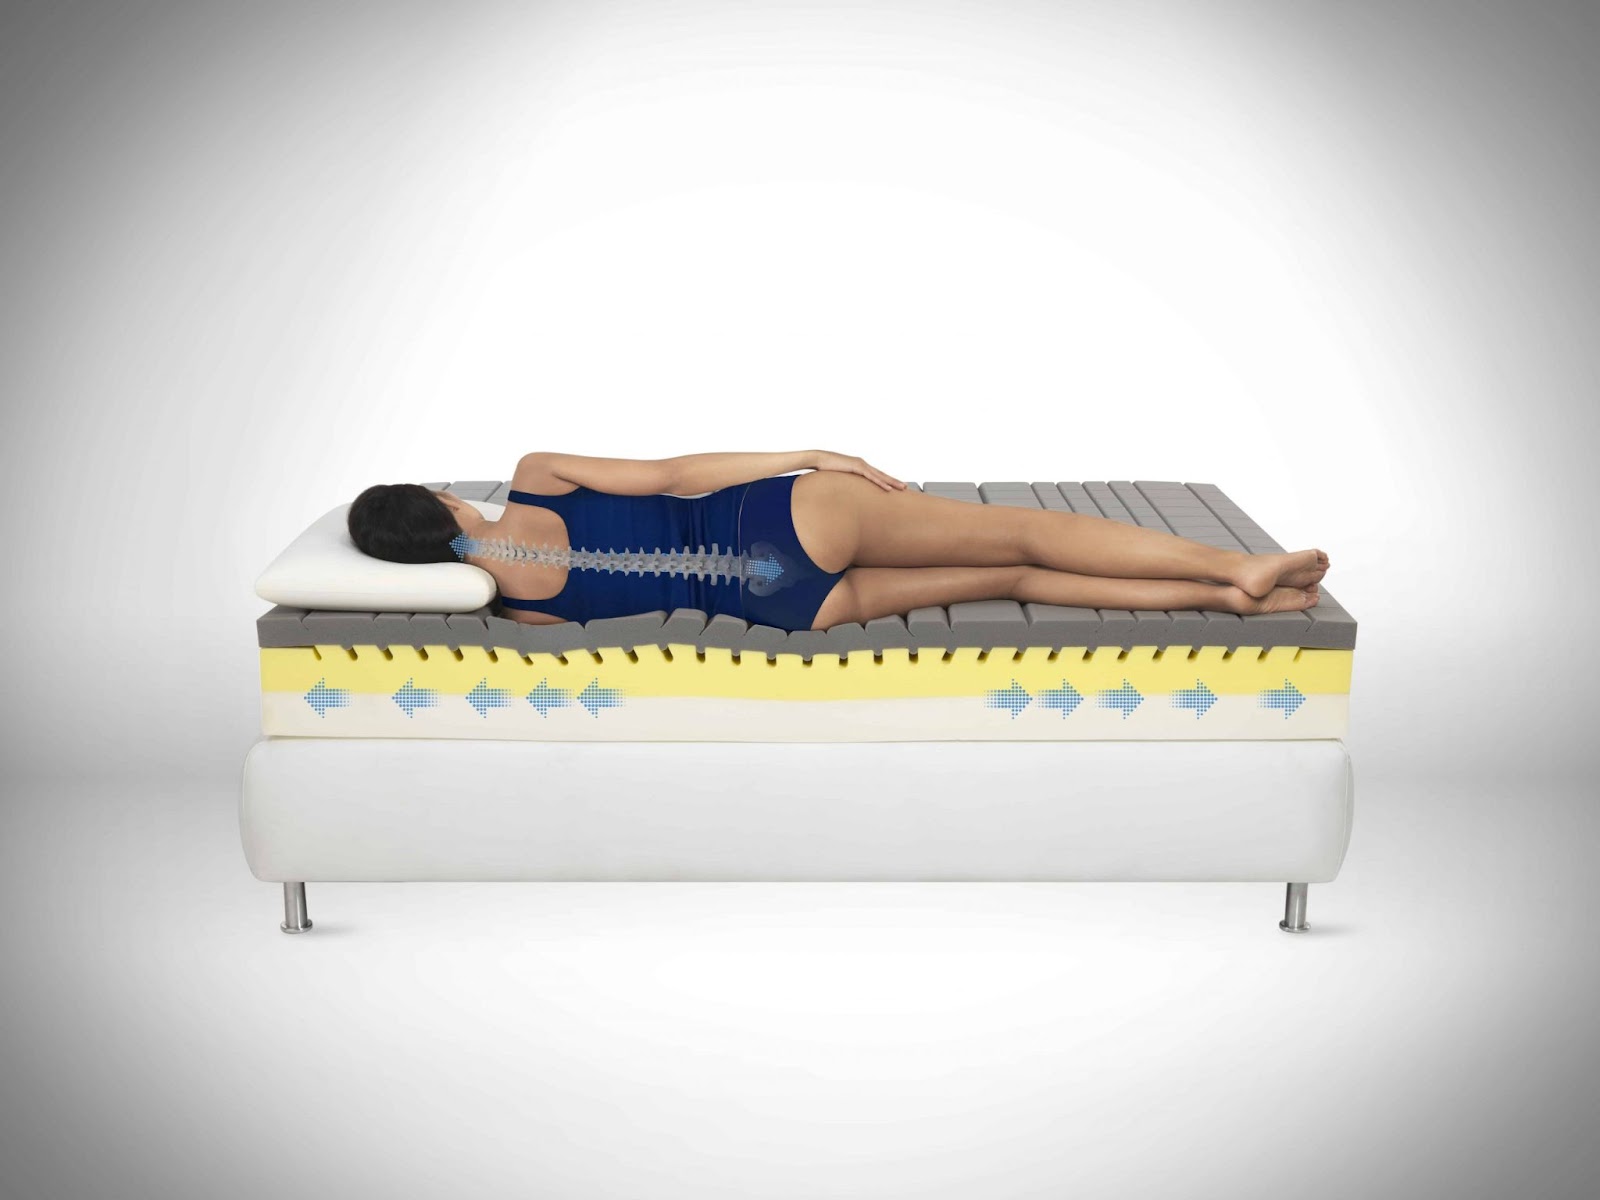 The benefits of an orthopedic mattress are numerous but the most important is that they relieve extreme pain and orthopedic conditions.